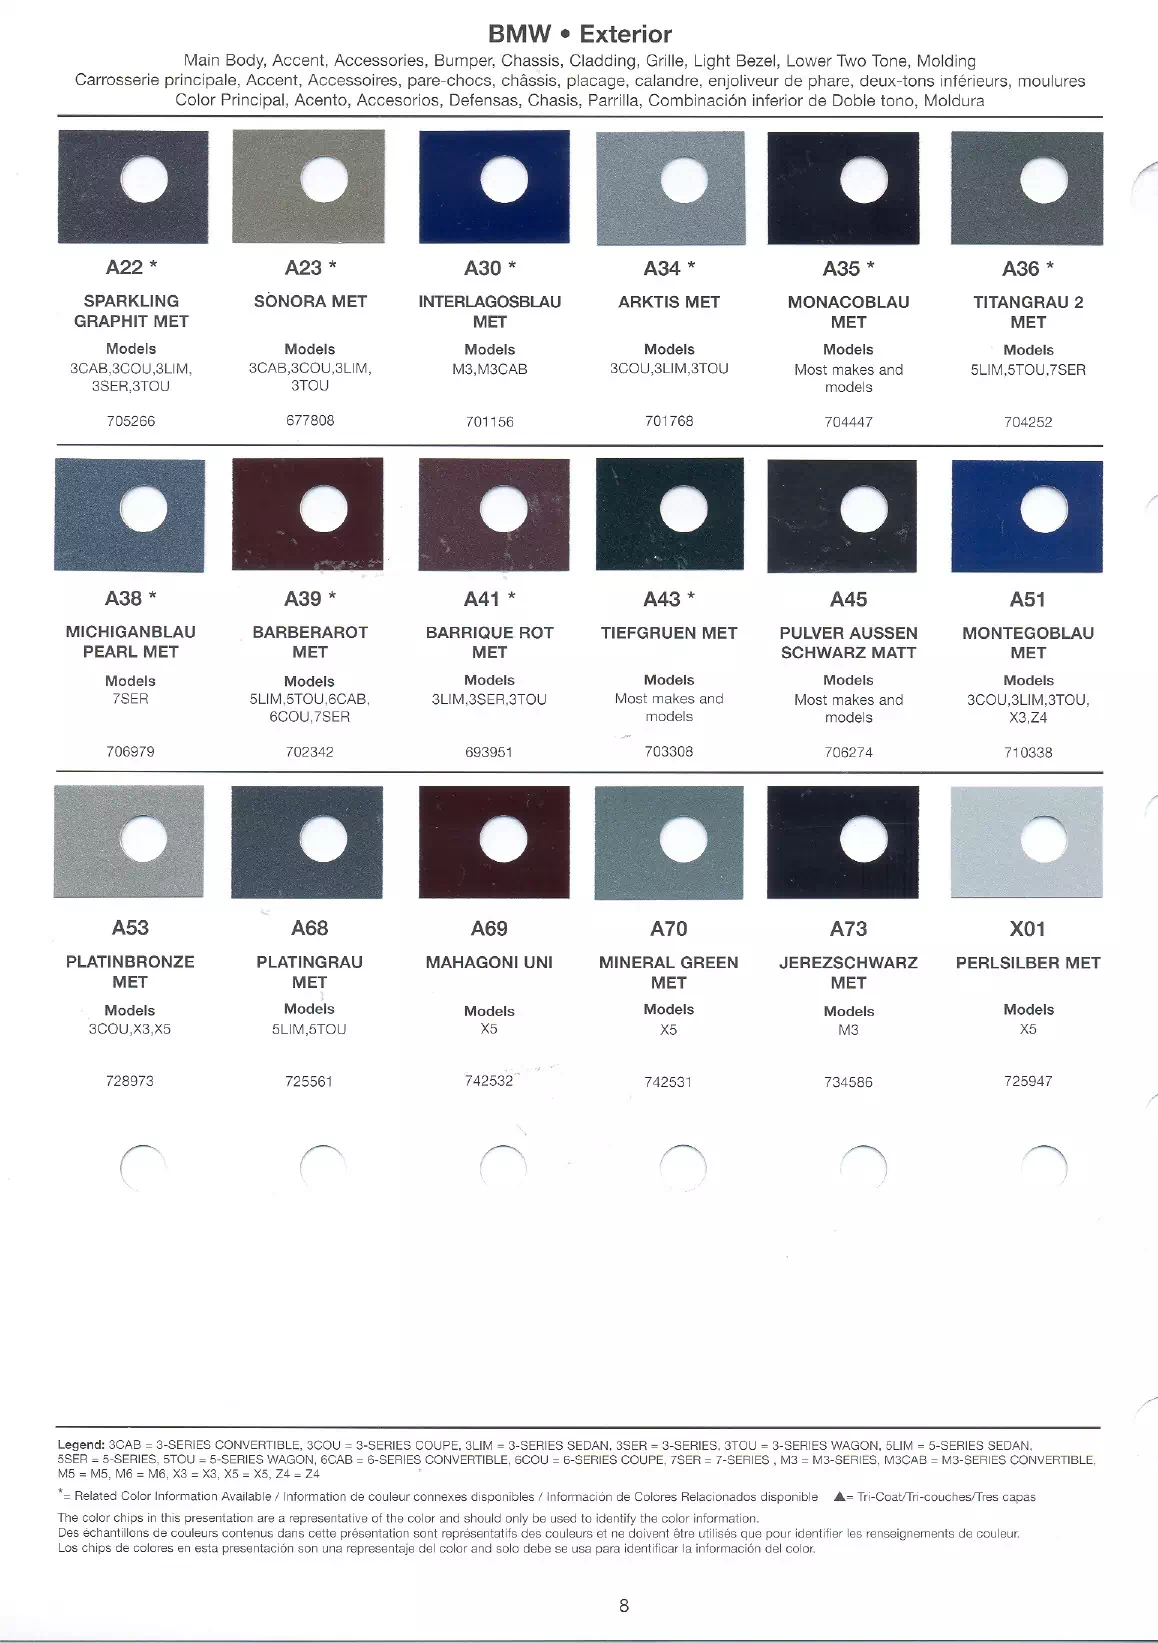 paint codes, color information, interior, exterior and accent colors for 2007 bmw's